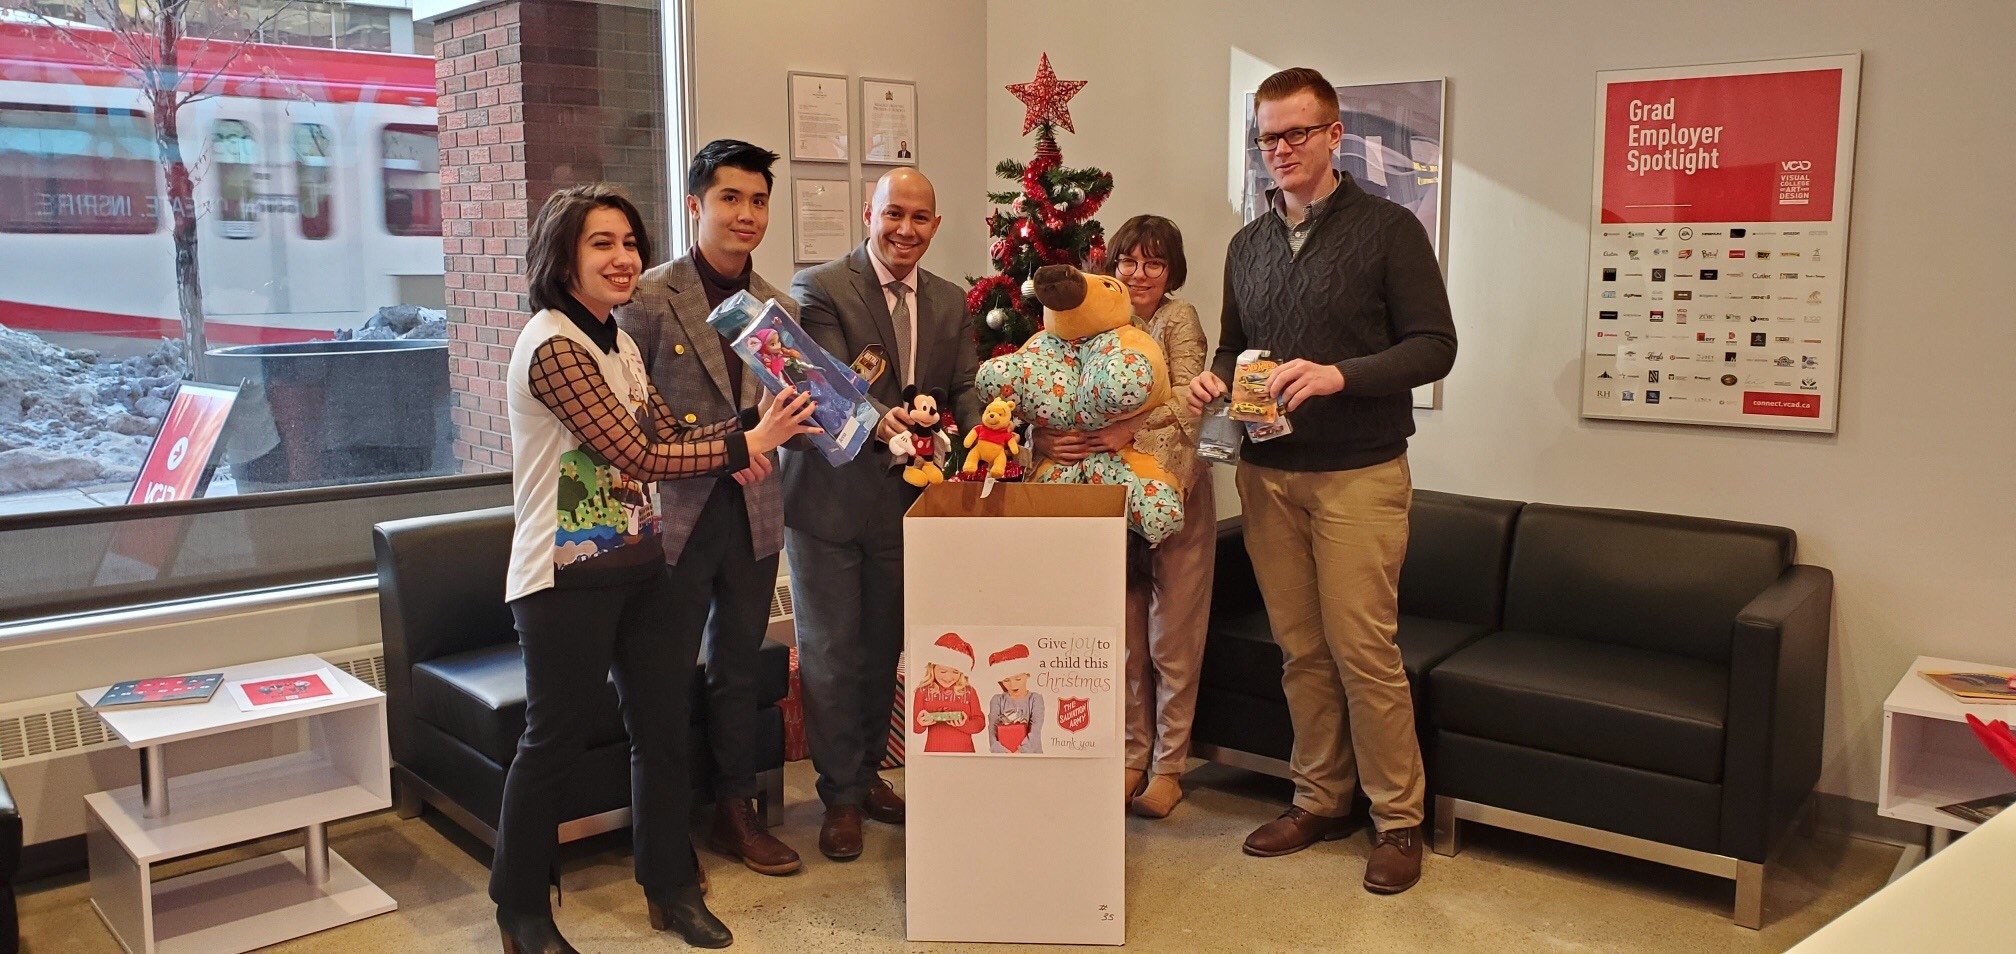 VCAD Gives Back in Annual Toy Drive Event